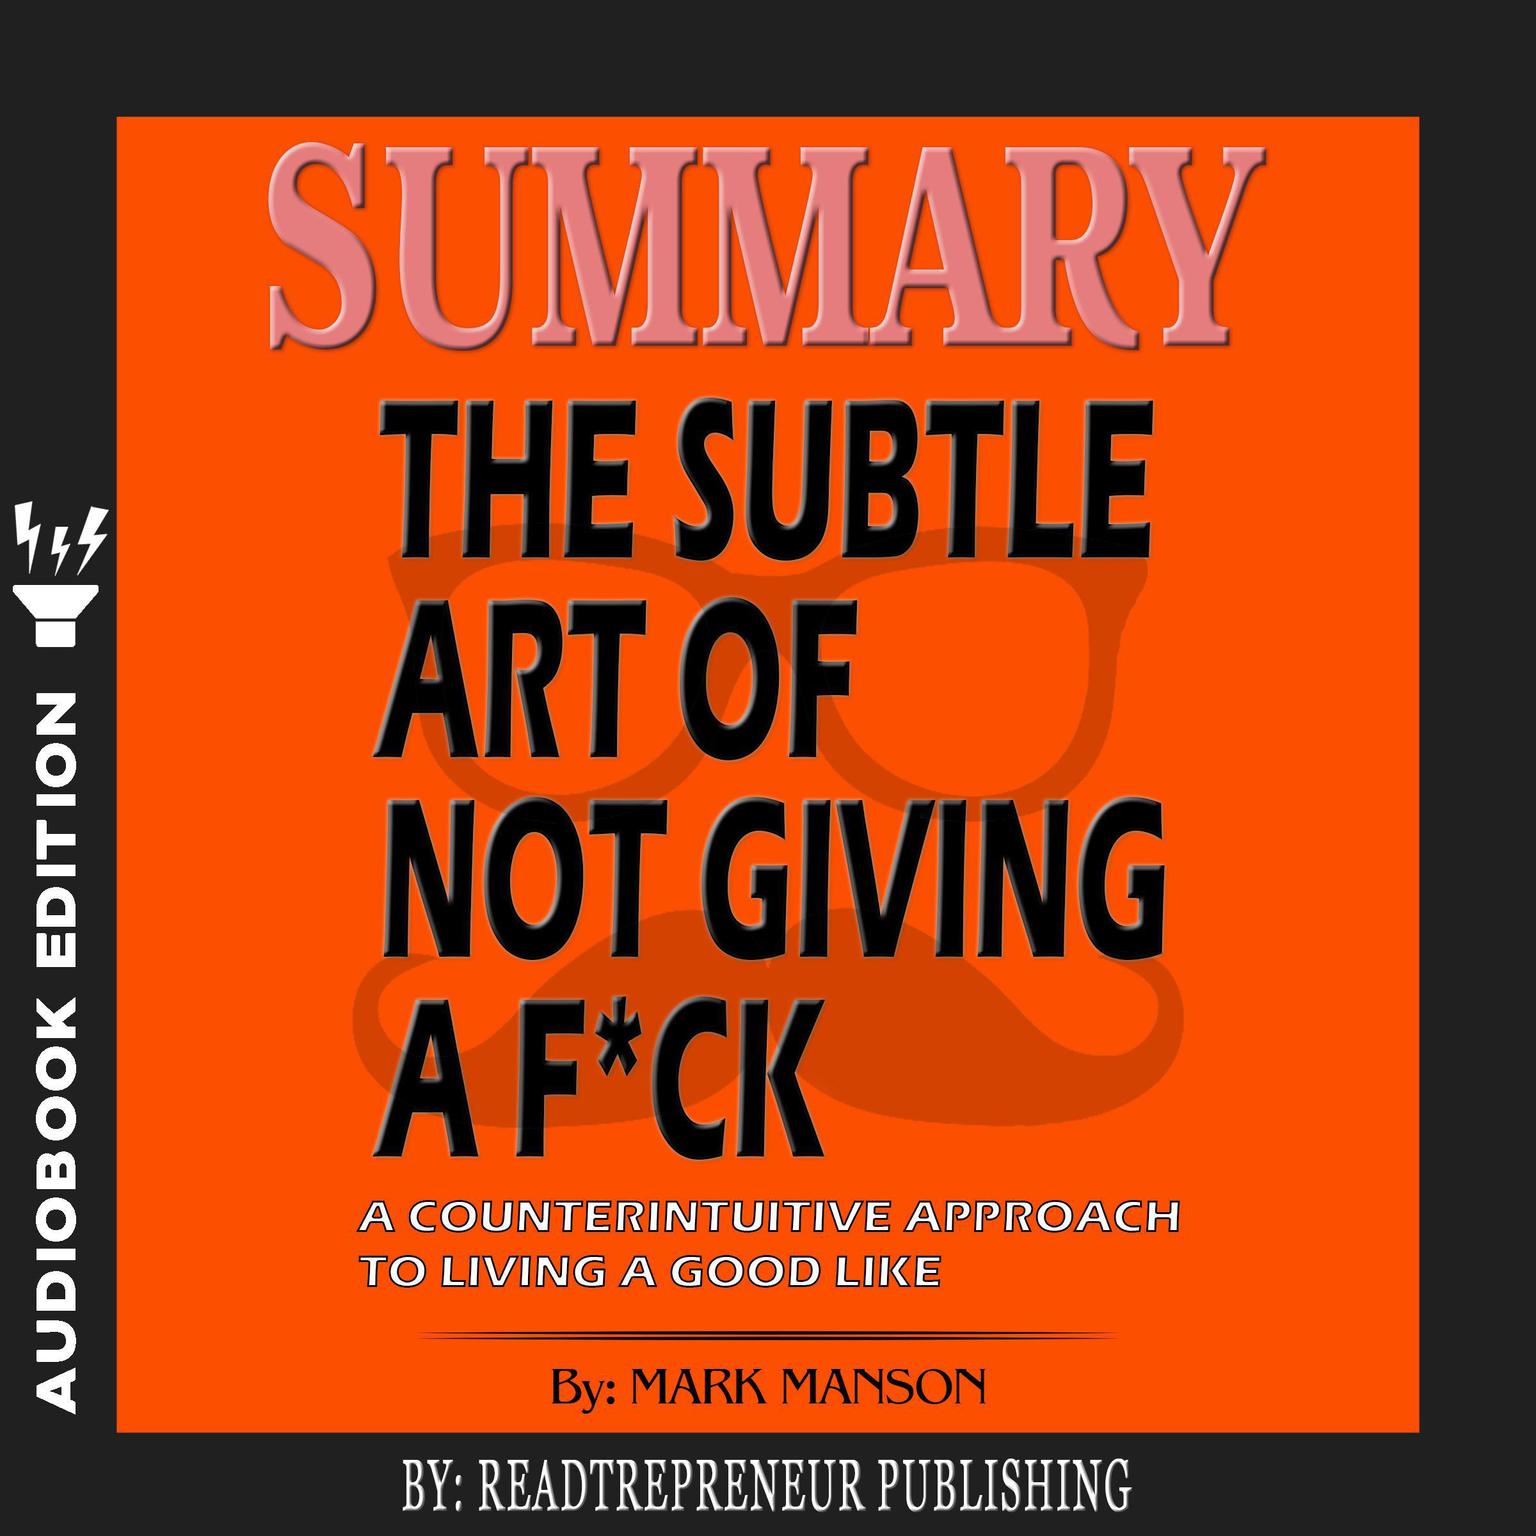 Summary of The Subtle Art of Not Giving a F*ck: A Counterintuitive Approach to Living a Good Life by Mark Manson Audiobook, by Readtrepreneur Publishing